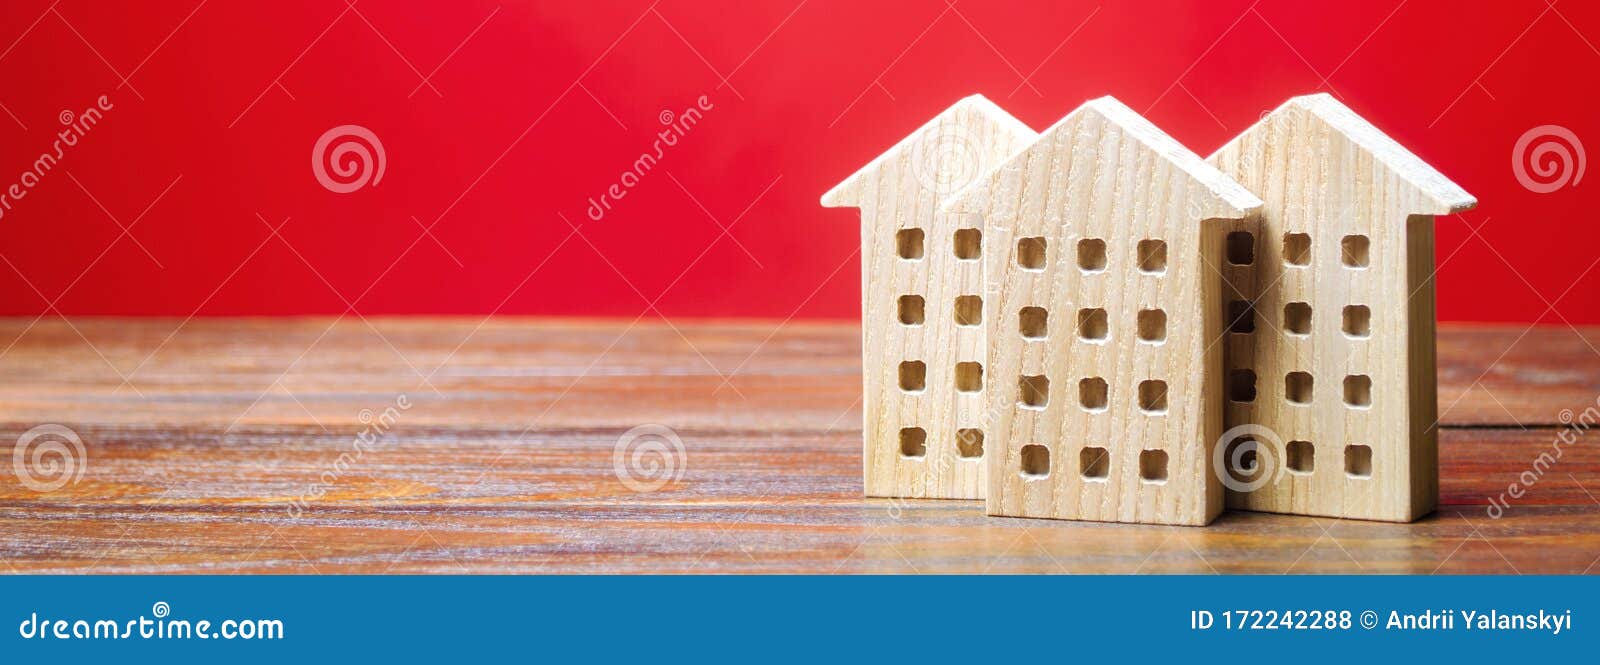 miniature wooden houses on a red background. real estate concept. city. agglomeration and urbanization. market analytics. demand